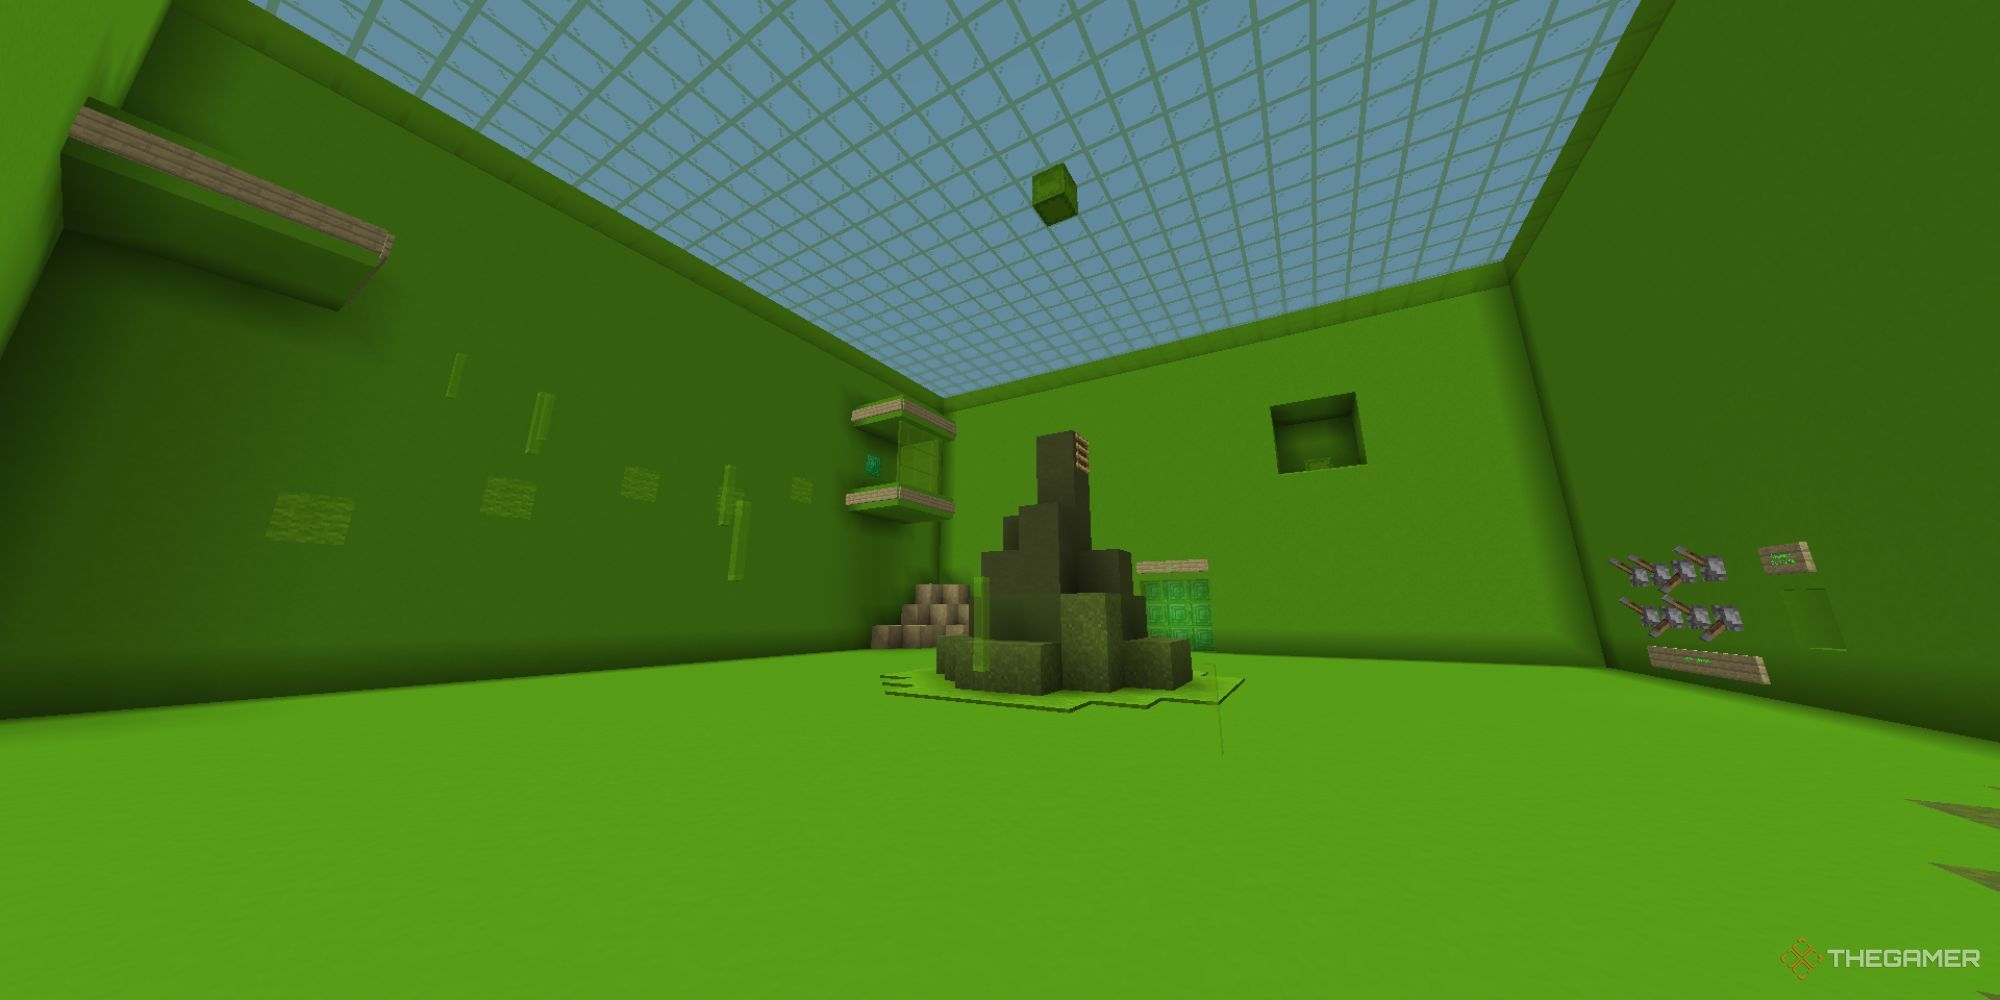 A largely bright green room with various puzzle and parkour challenges to figure out inside.